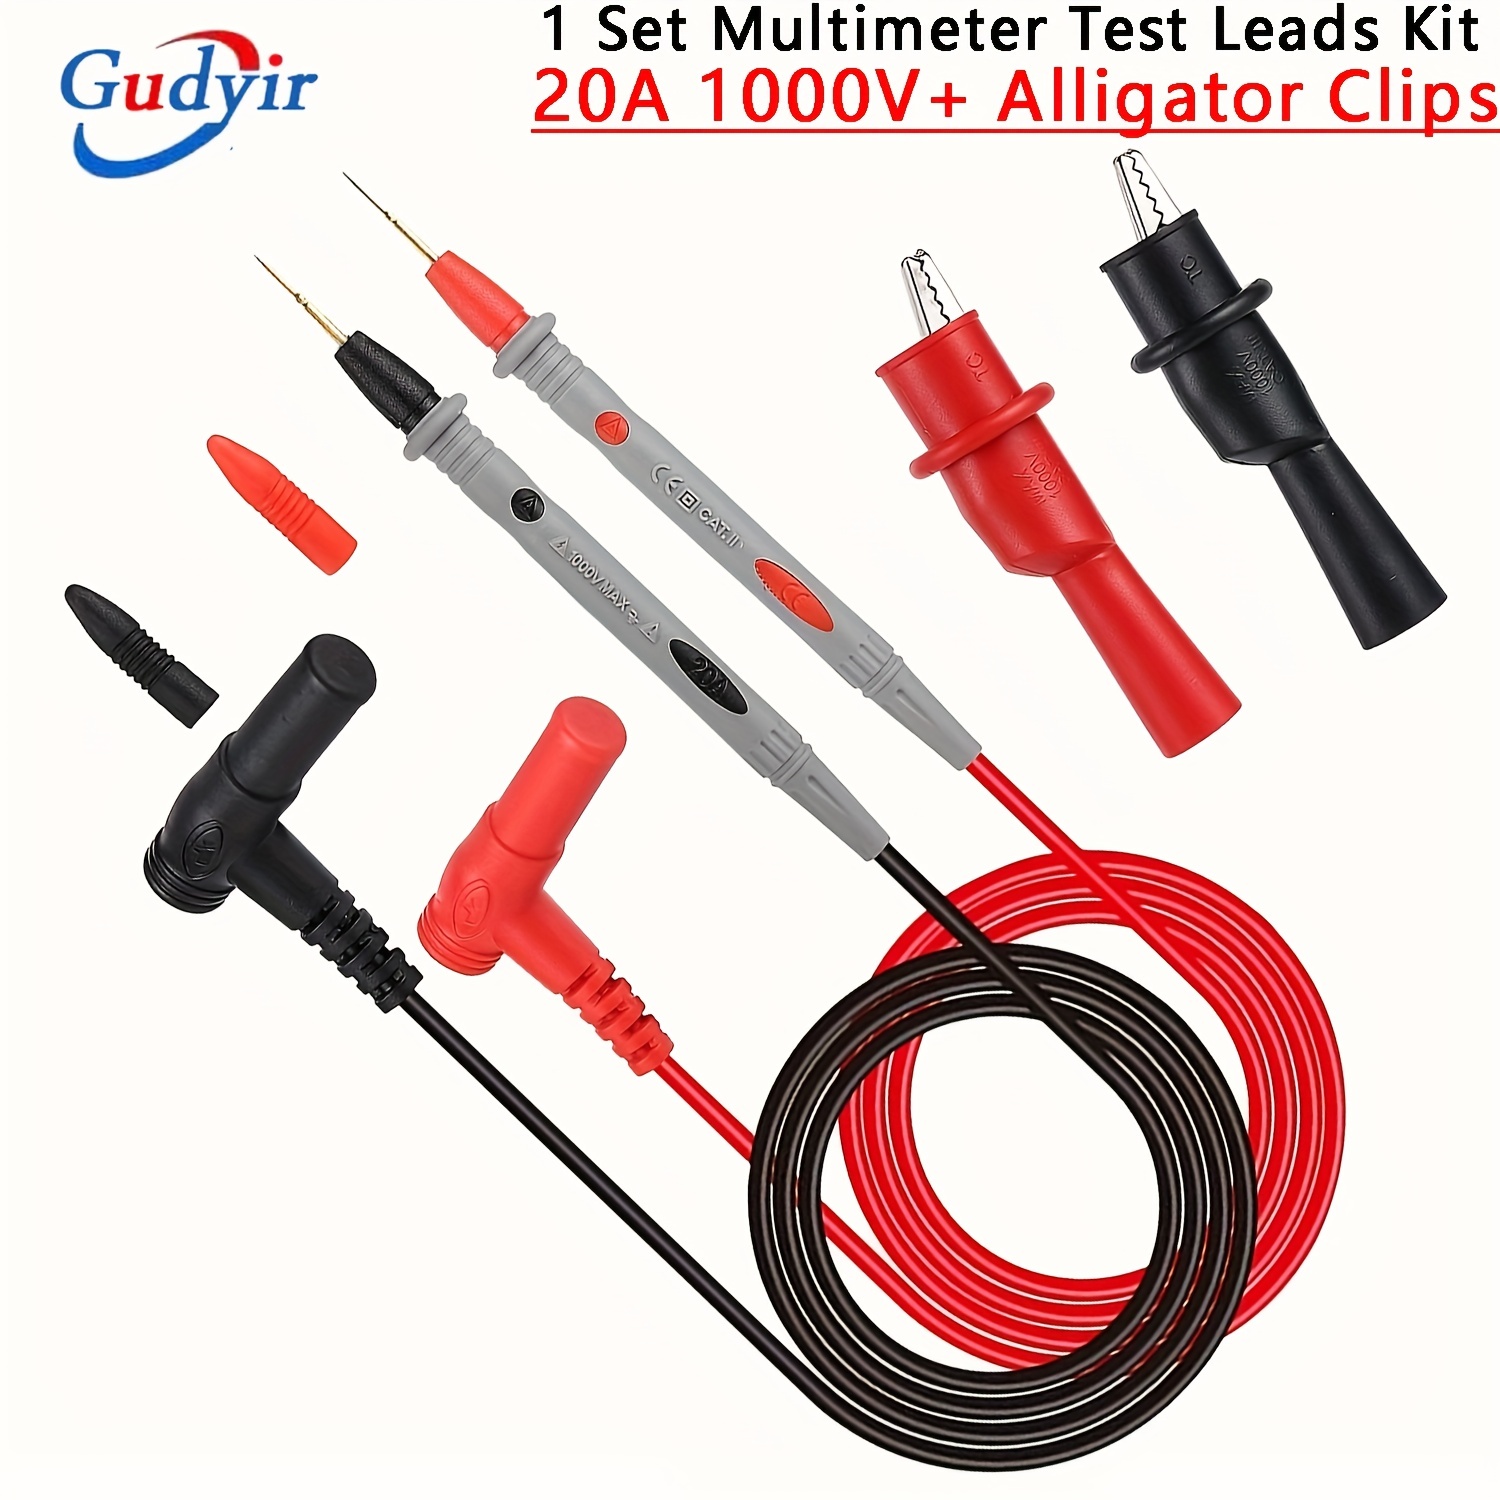 Aneng Pt1028 22in1 Digital Multimeter Test Leads Kit Multi Meter Cable  Probe Electronic Work